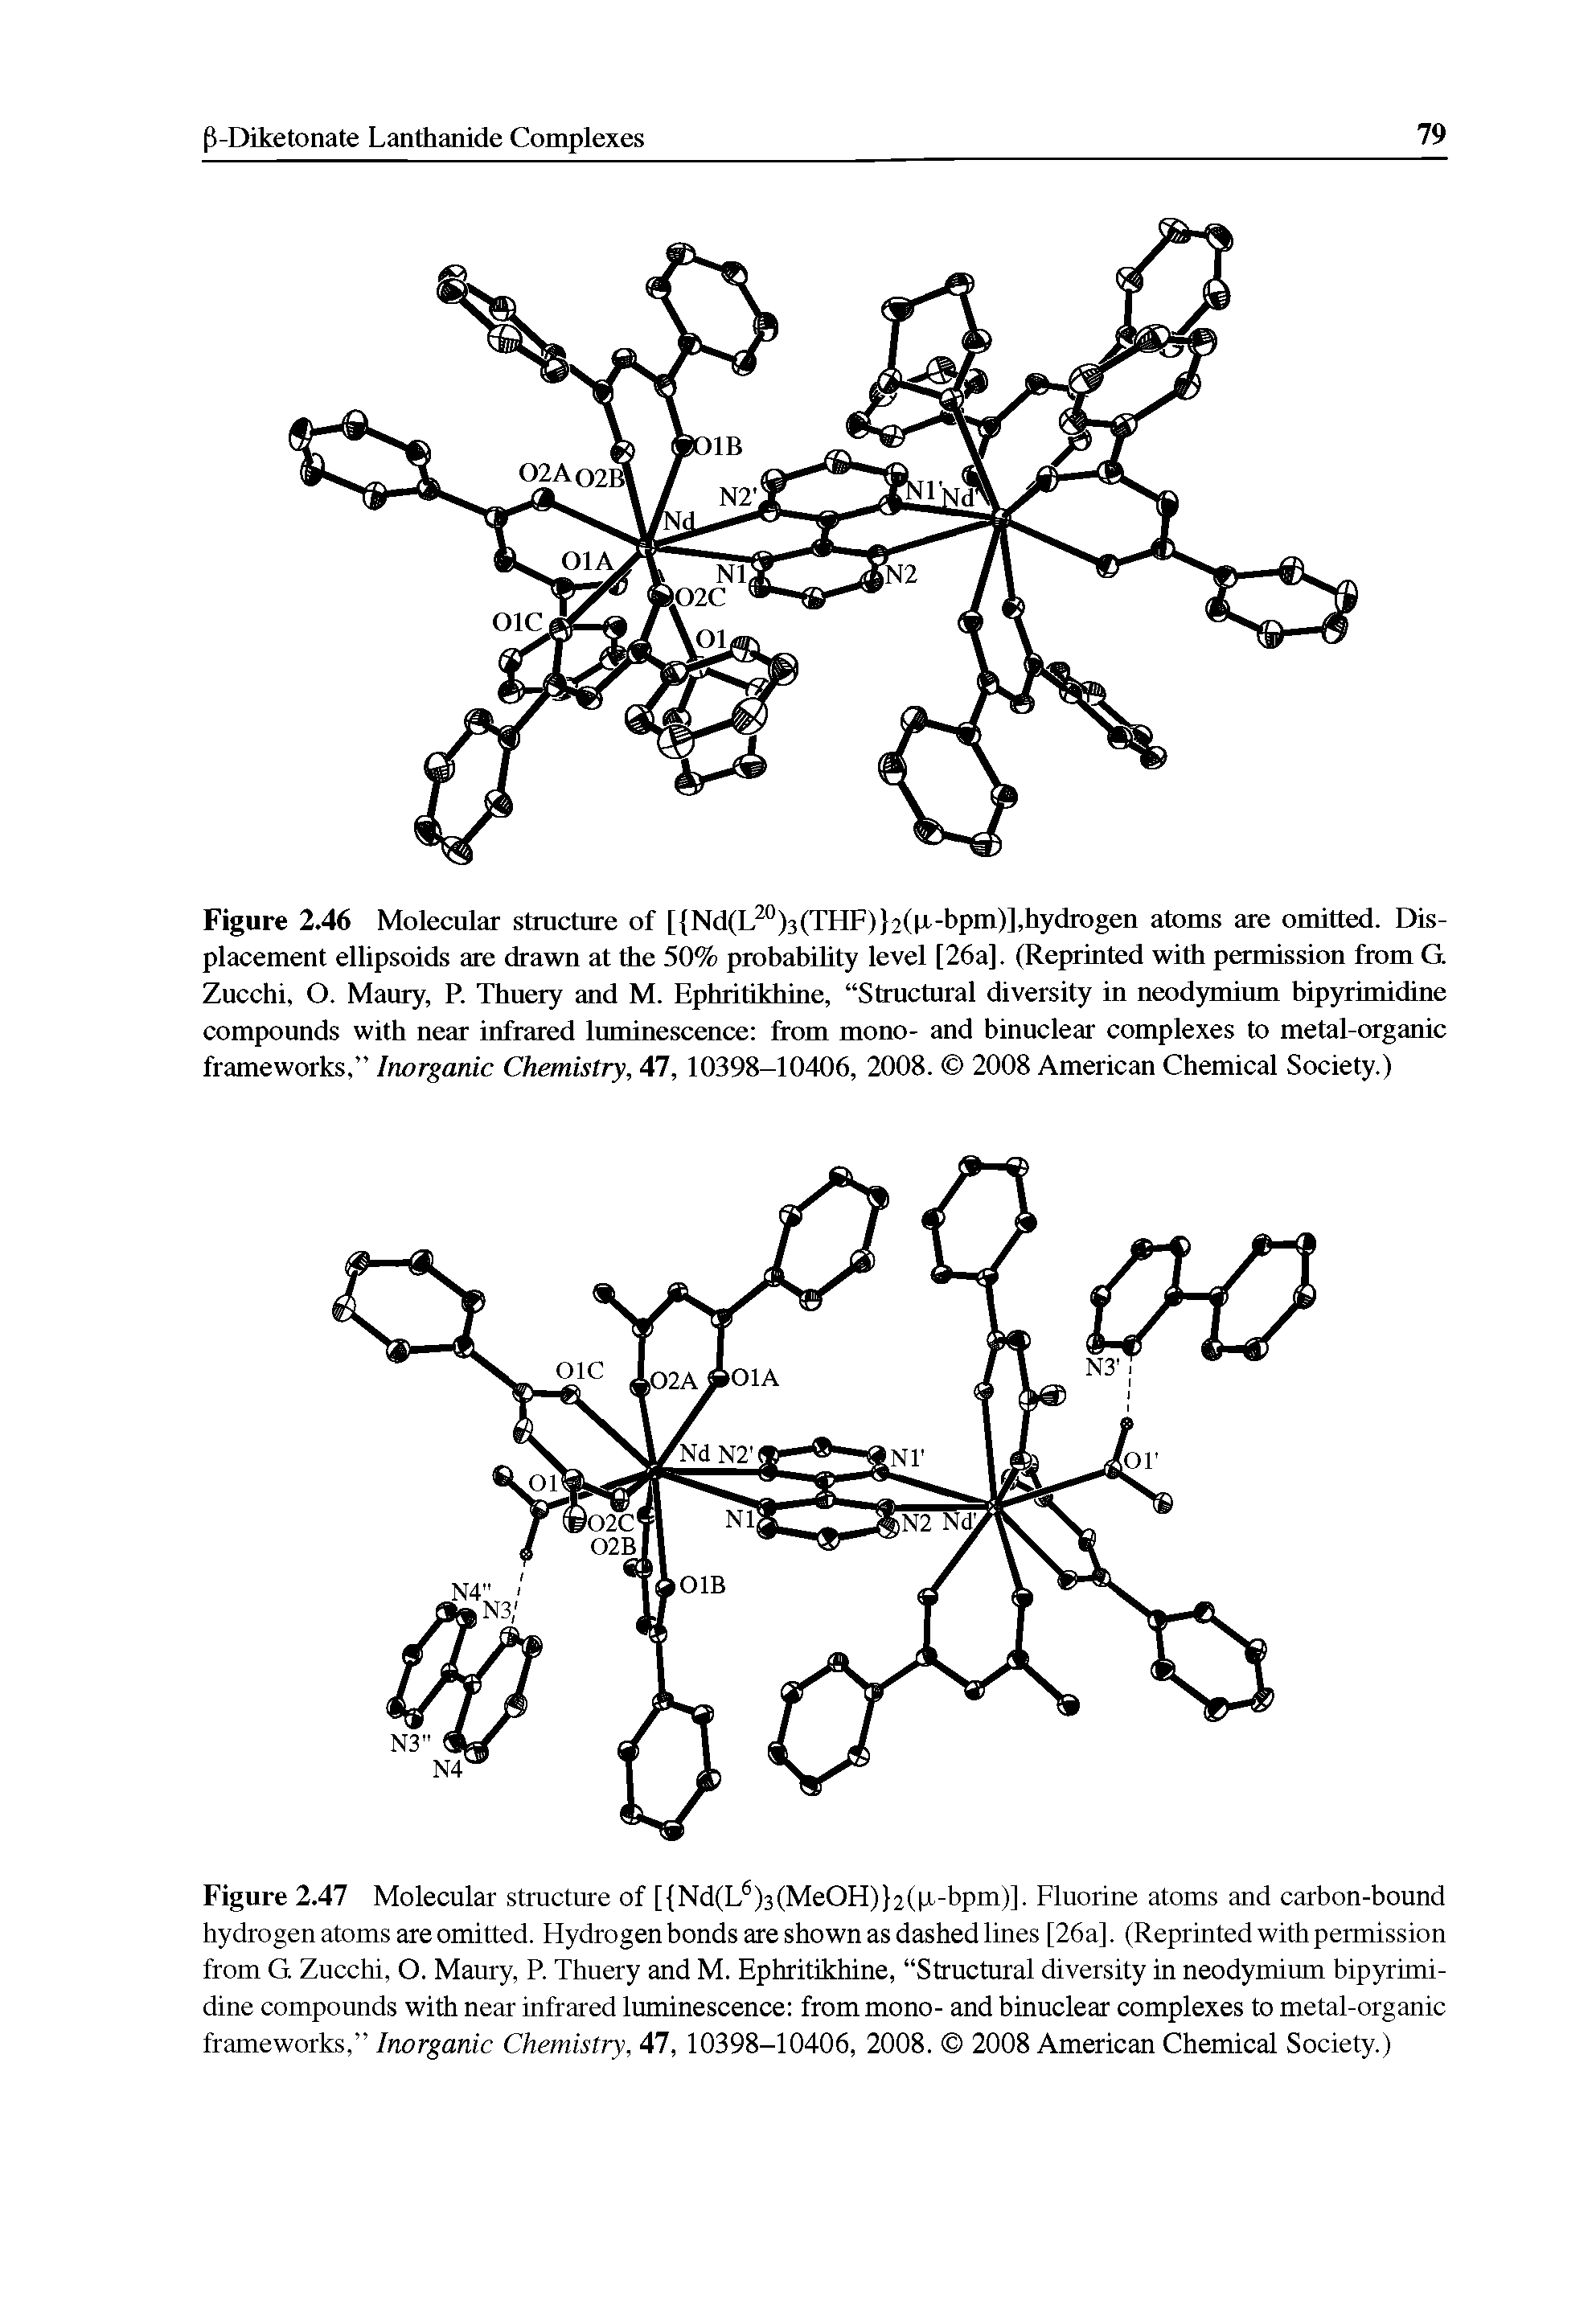 Figure 2.46 Molecular structure of [ Nd(L °)3(THF) 2(ir-bpm)],hydrogen atoms are omitted. Displacement ellipsoids are drawn at the 50% prohahihty level [26a]. (Reprinted with permission from G. Zucchi, O. Maury, R Thuery and M. Ephritikhine, Structural diversity in neodymium hipyrimidine compounds with near infrared luminescence from mono- and binuclear complexes to metal-organic frameworks, Inorganic Chemistry, 47, 10398-10406, 2008. 2008 American Chemical Society.)...